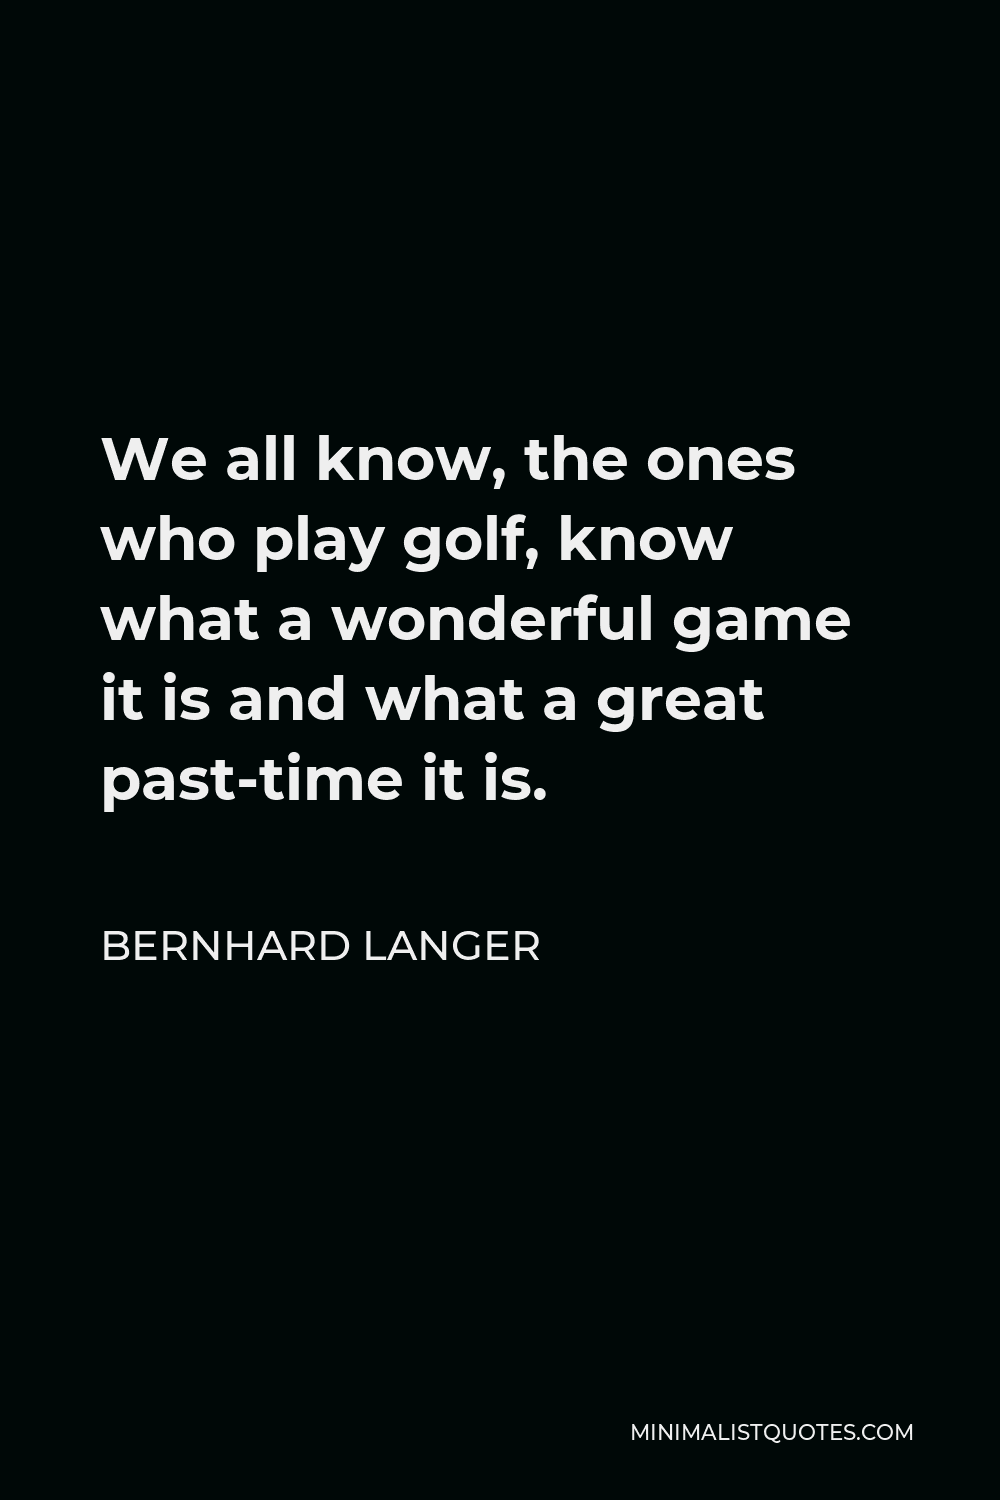 Bernhard Langer Quote - We all know, the ones who play golf, know what a wonderful game it is and what a great past-time it is.